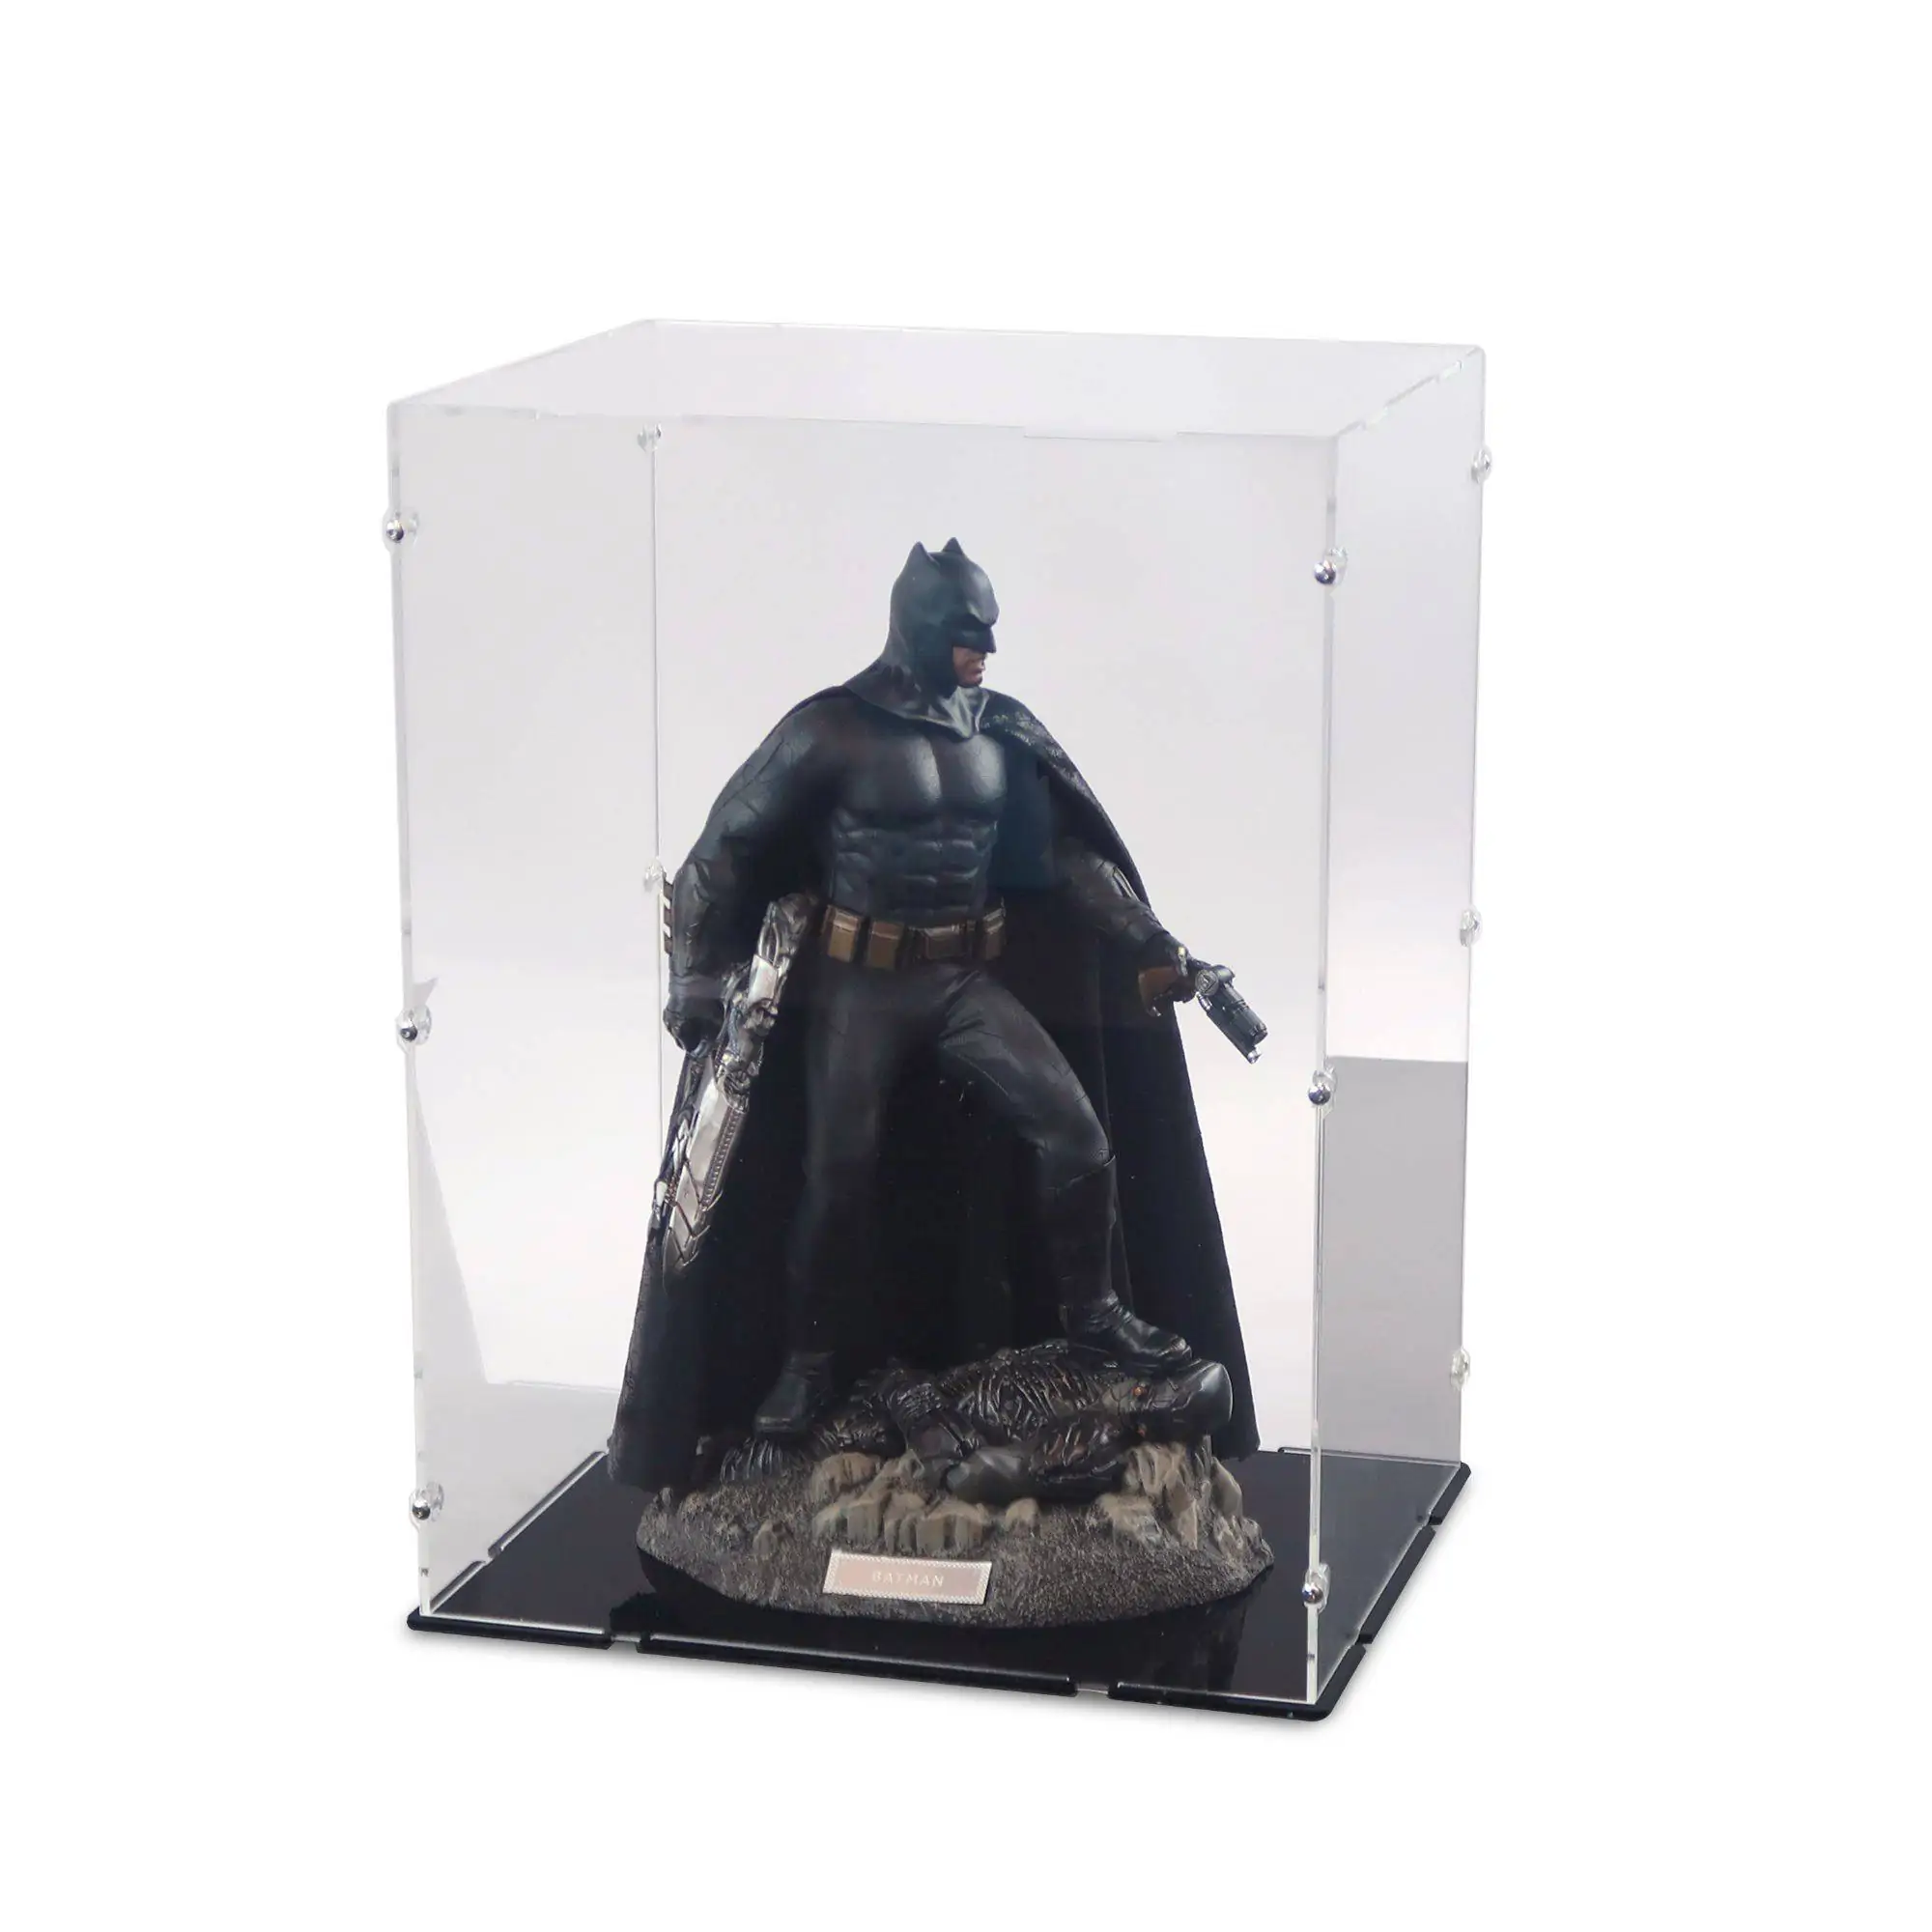 1/6 Hot Toys Display Cases :: 1/6 Scale Batman Justice League Display Case  for Hot Toys Deluxe Version